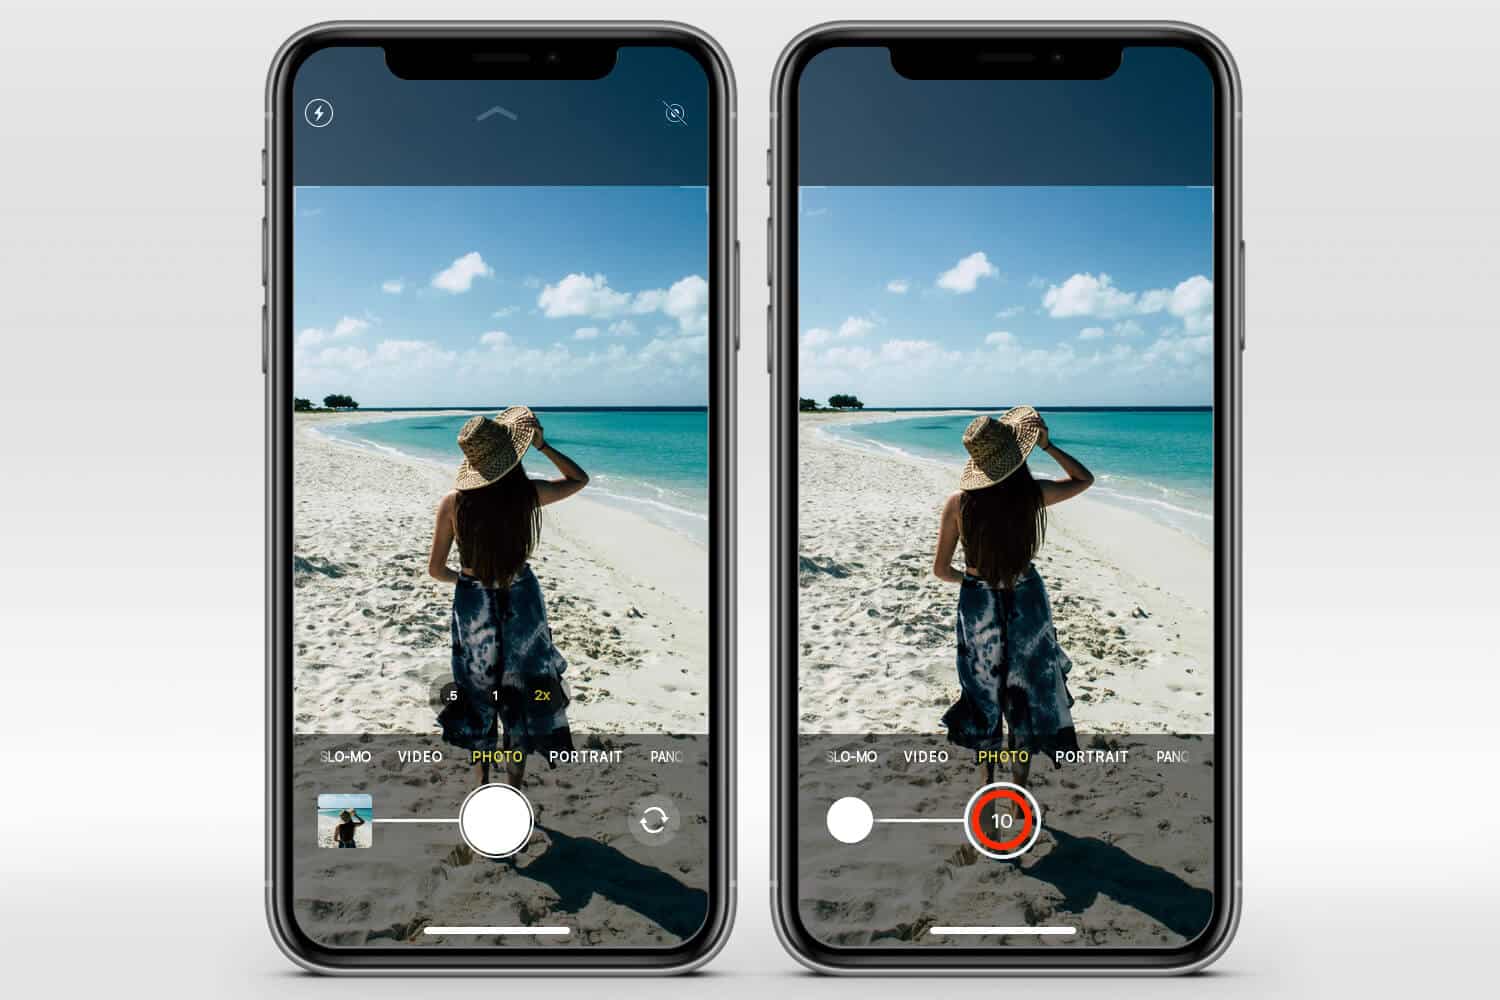 Capture Burst Photos on iPhone 11 Pro Max, 11 Pro, and iPhone 11